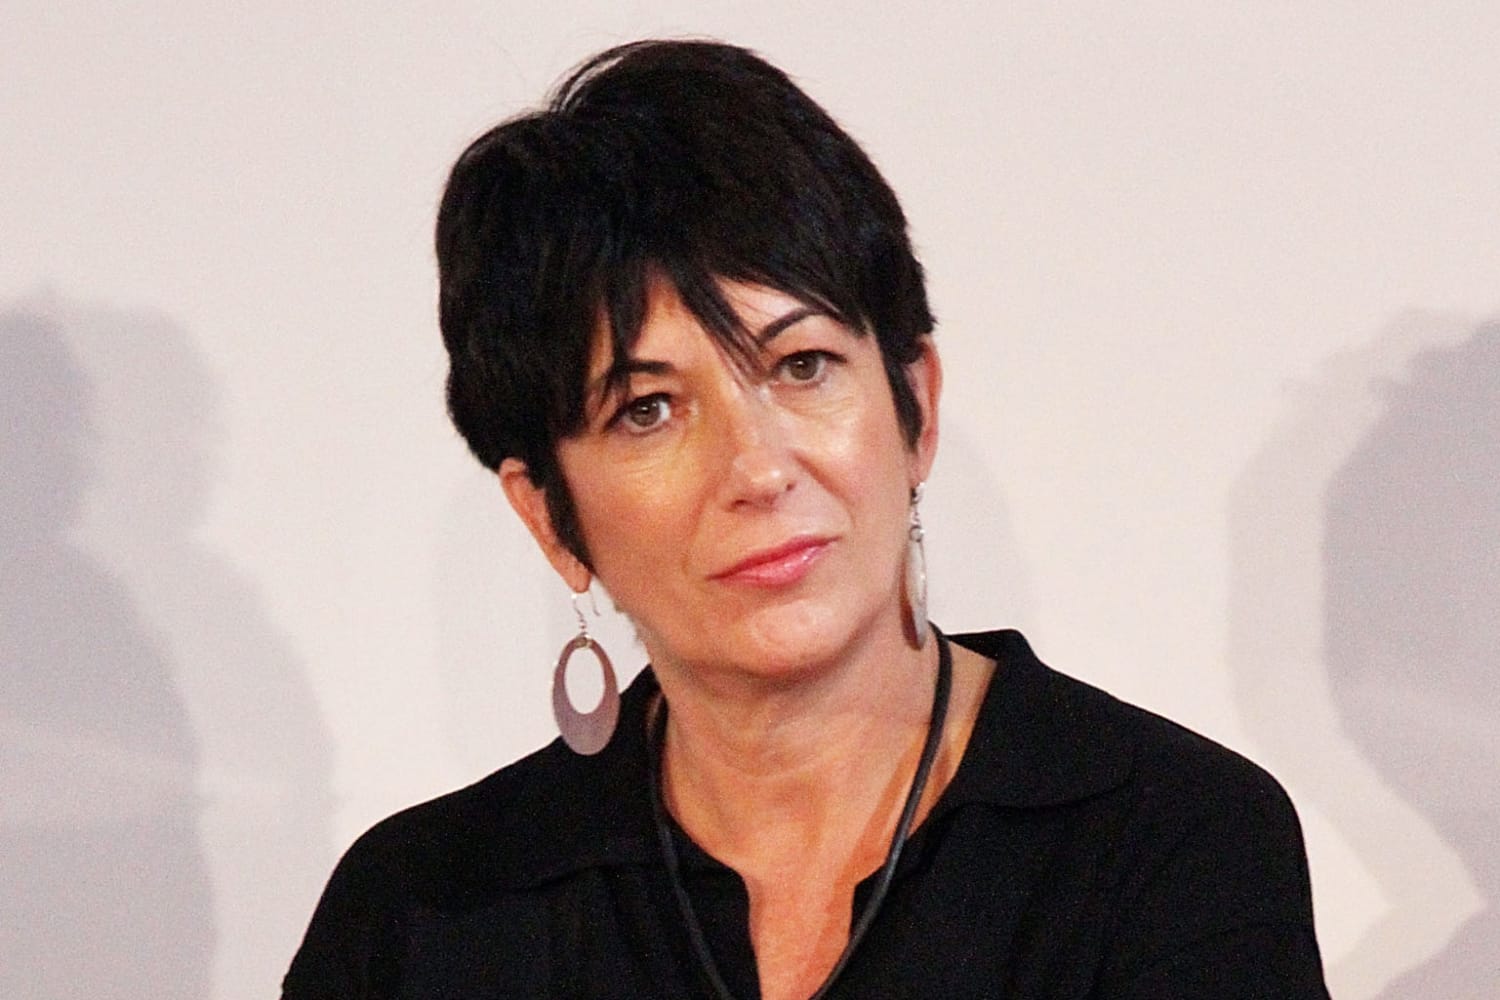 Ghislaine Maxwell convicted of federal sex trafficking charges for role in Jeffrey Epstein’s abuses